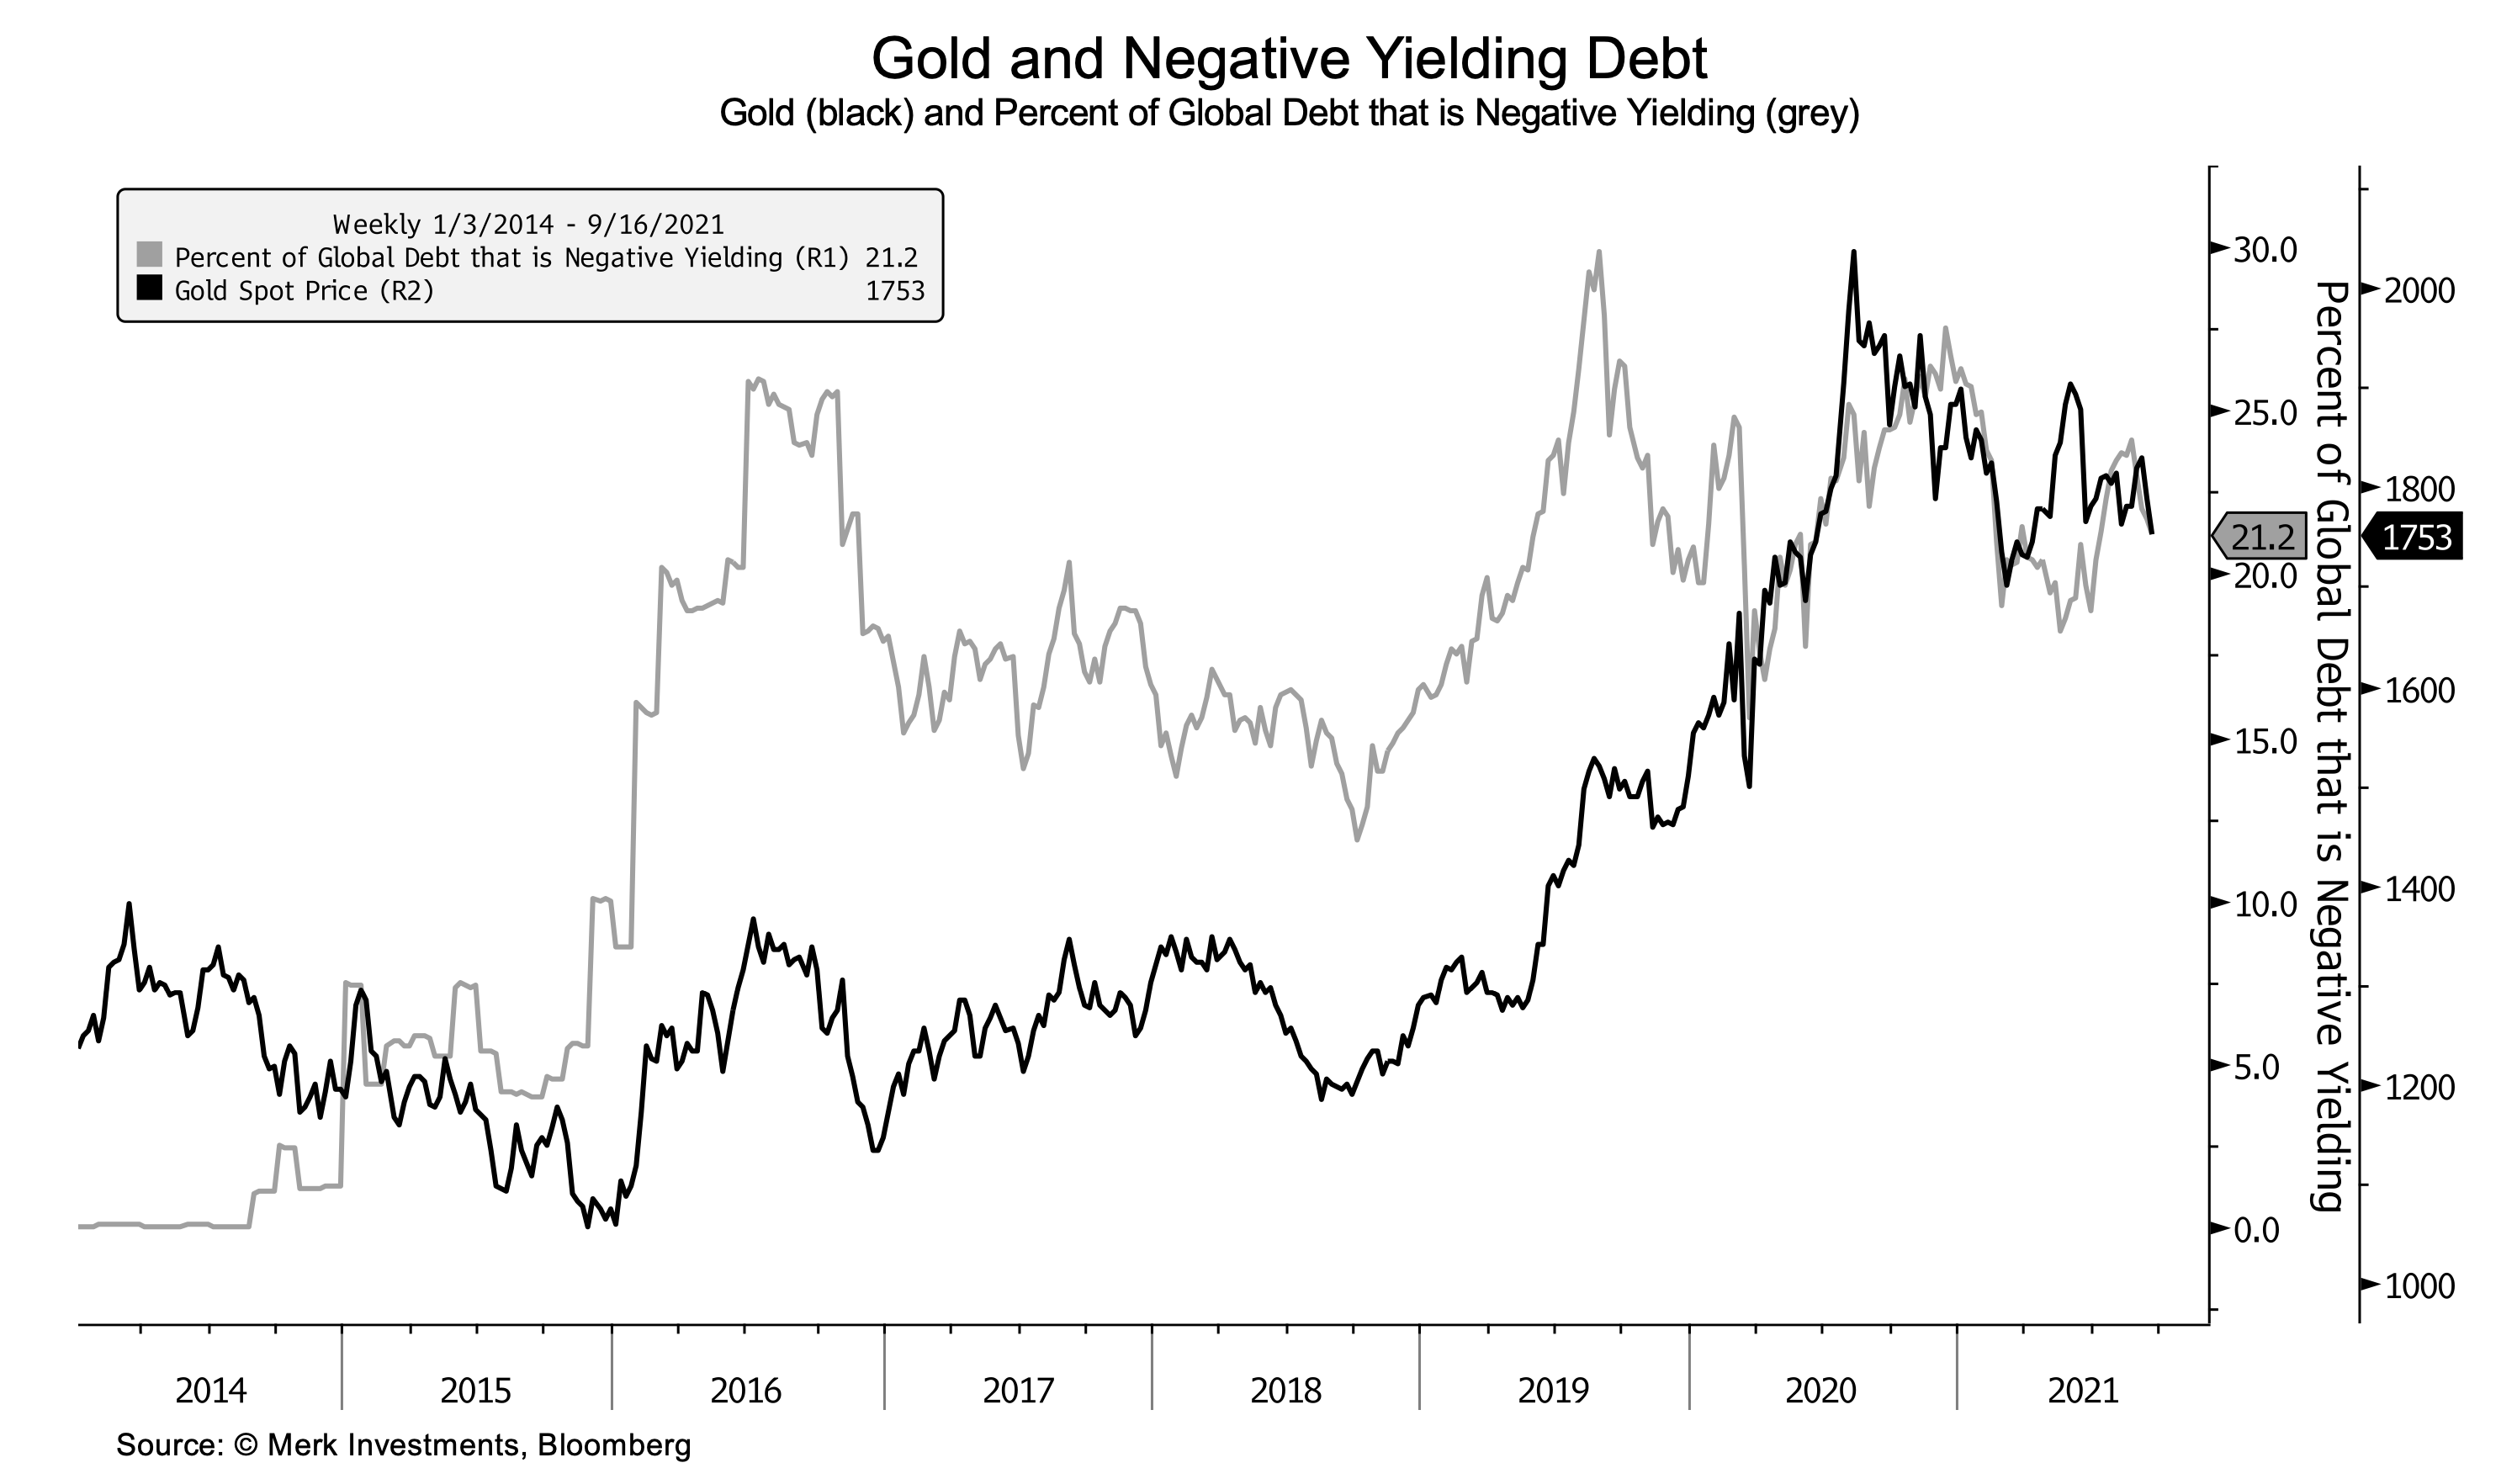 overlay line chart showing gold and negative yielding debt aggregate 2014 to present